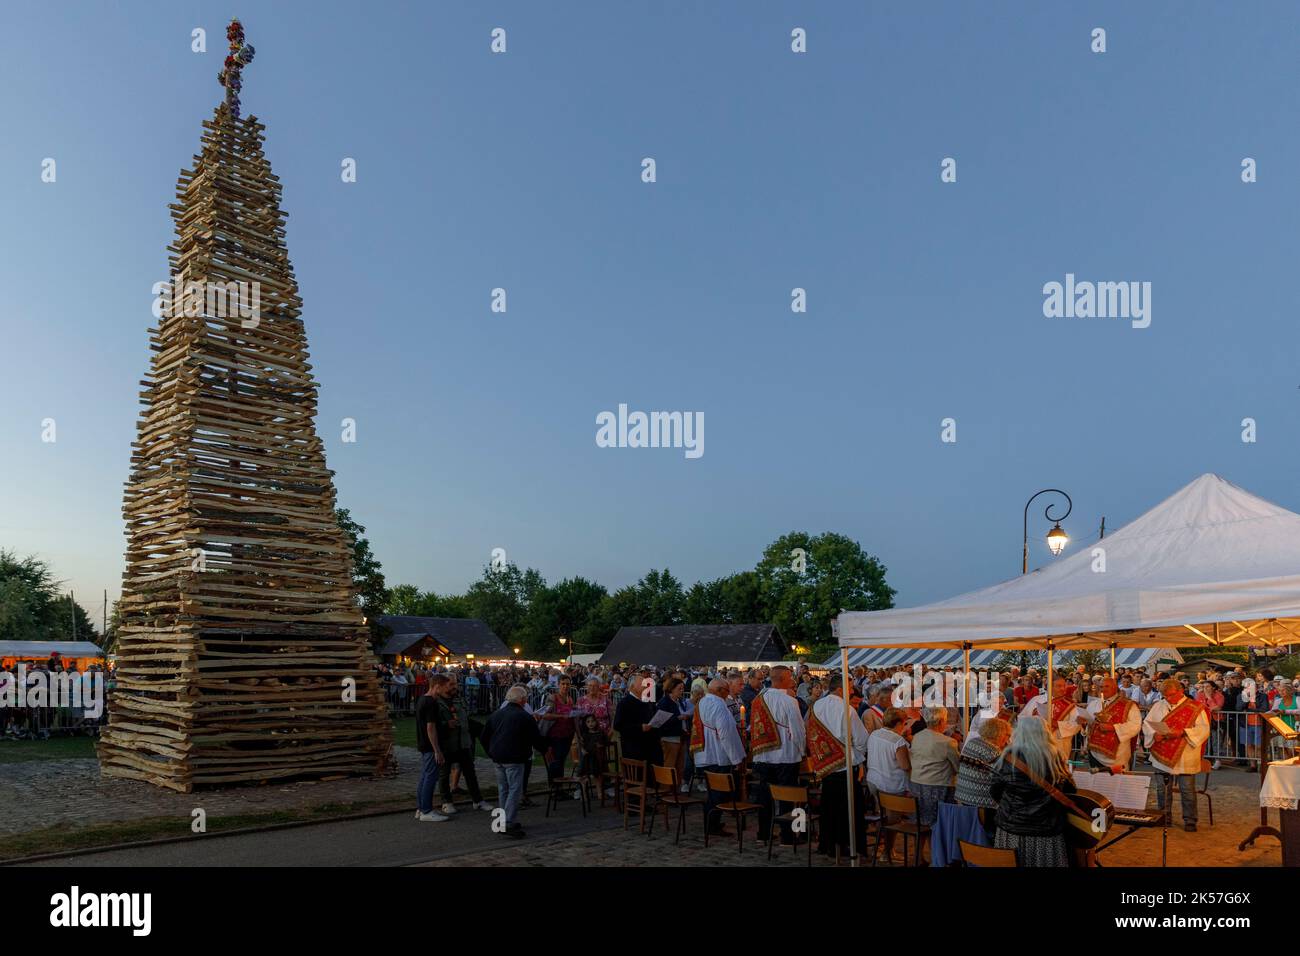 France, Eure, La Haye-de-Routot, traditional bonfire of Saint-Clair, a 15 meters high pyramid of dry wood is erected, on the village square, in front of the church and its thousand-year-old yews. A mass and a blessing precede the burning of the stake, if the cross at the top does not burn, it is a good sign for the 12 months to come, bringing back home a piece of charred wood, called brandon, will protect the house against lightning Stock Photo